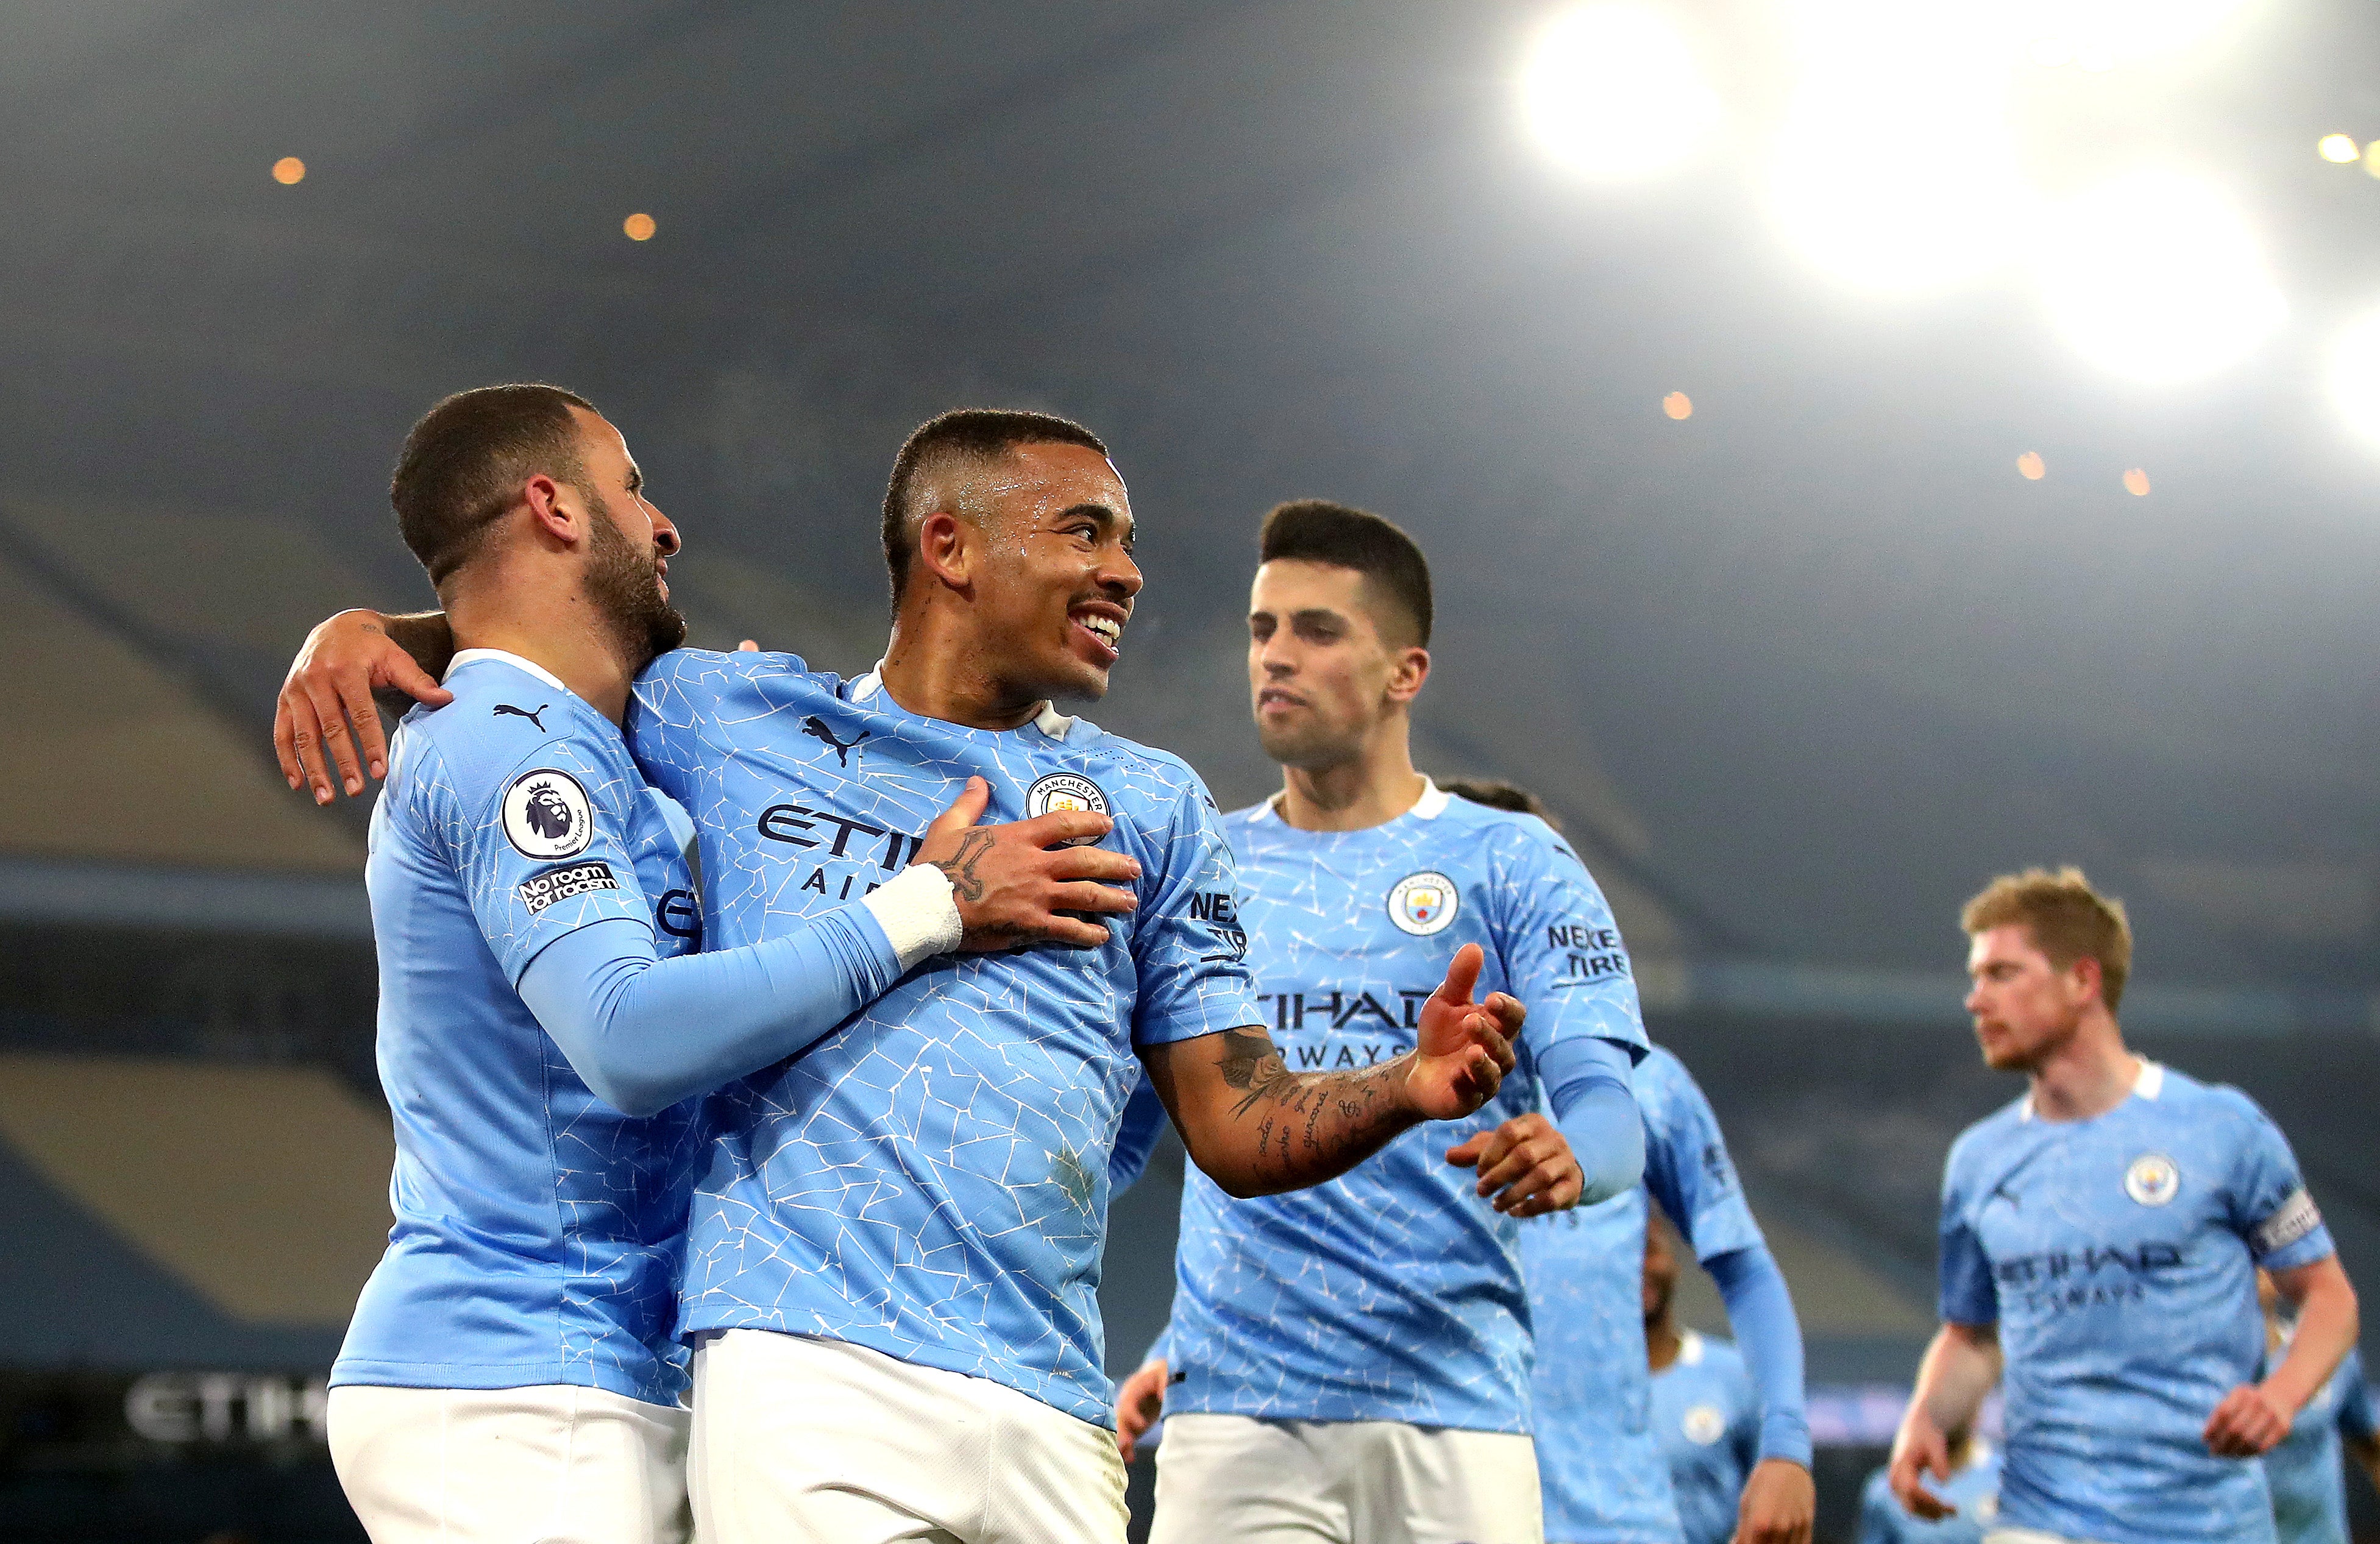 Manchester City have established an identity in their bid for recognition as one of the game’s super clubs